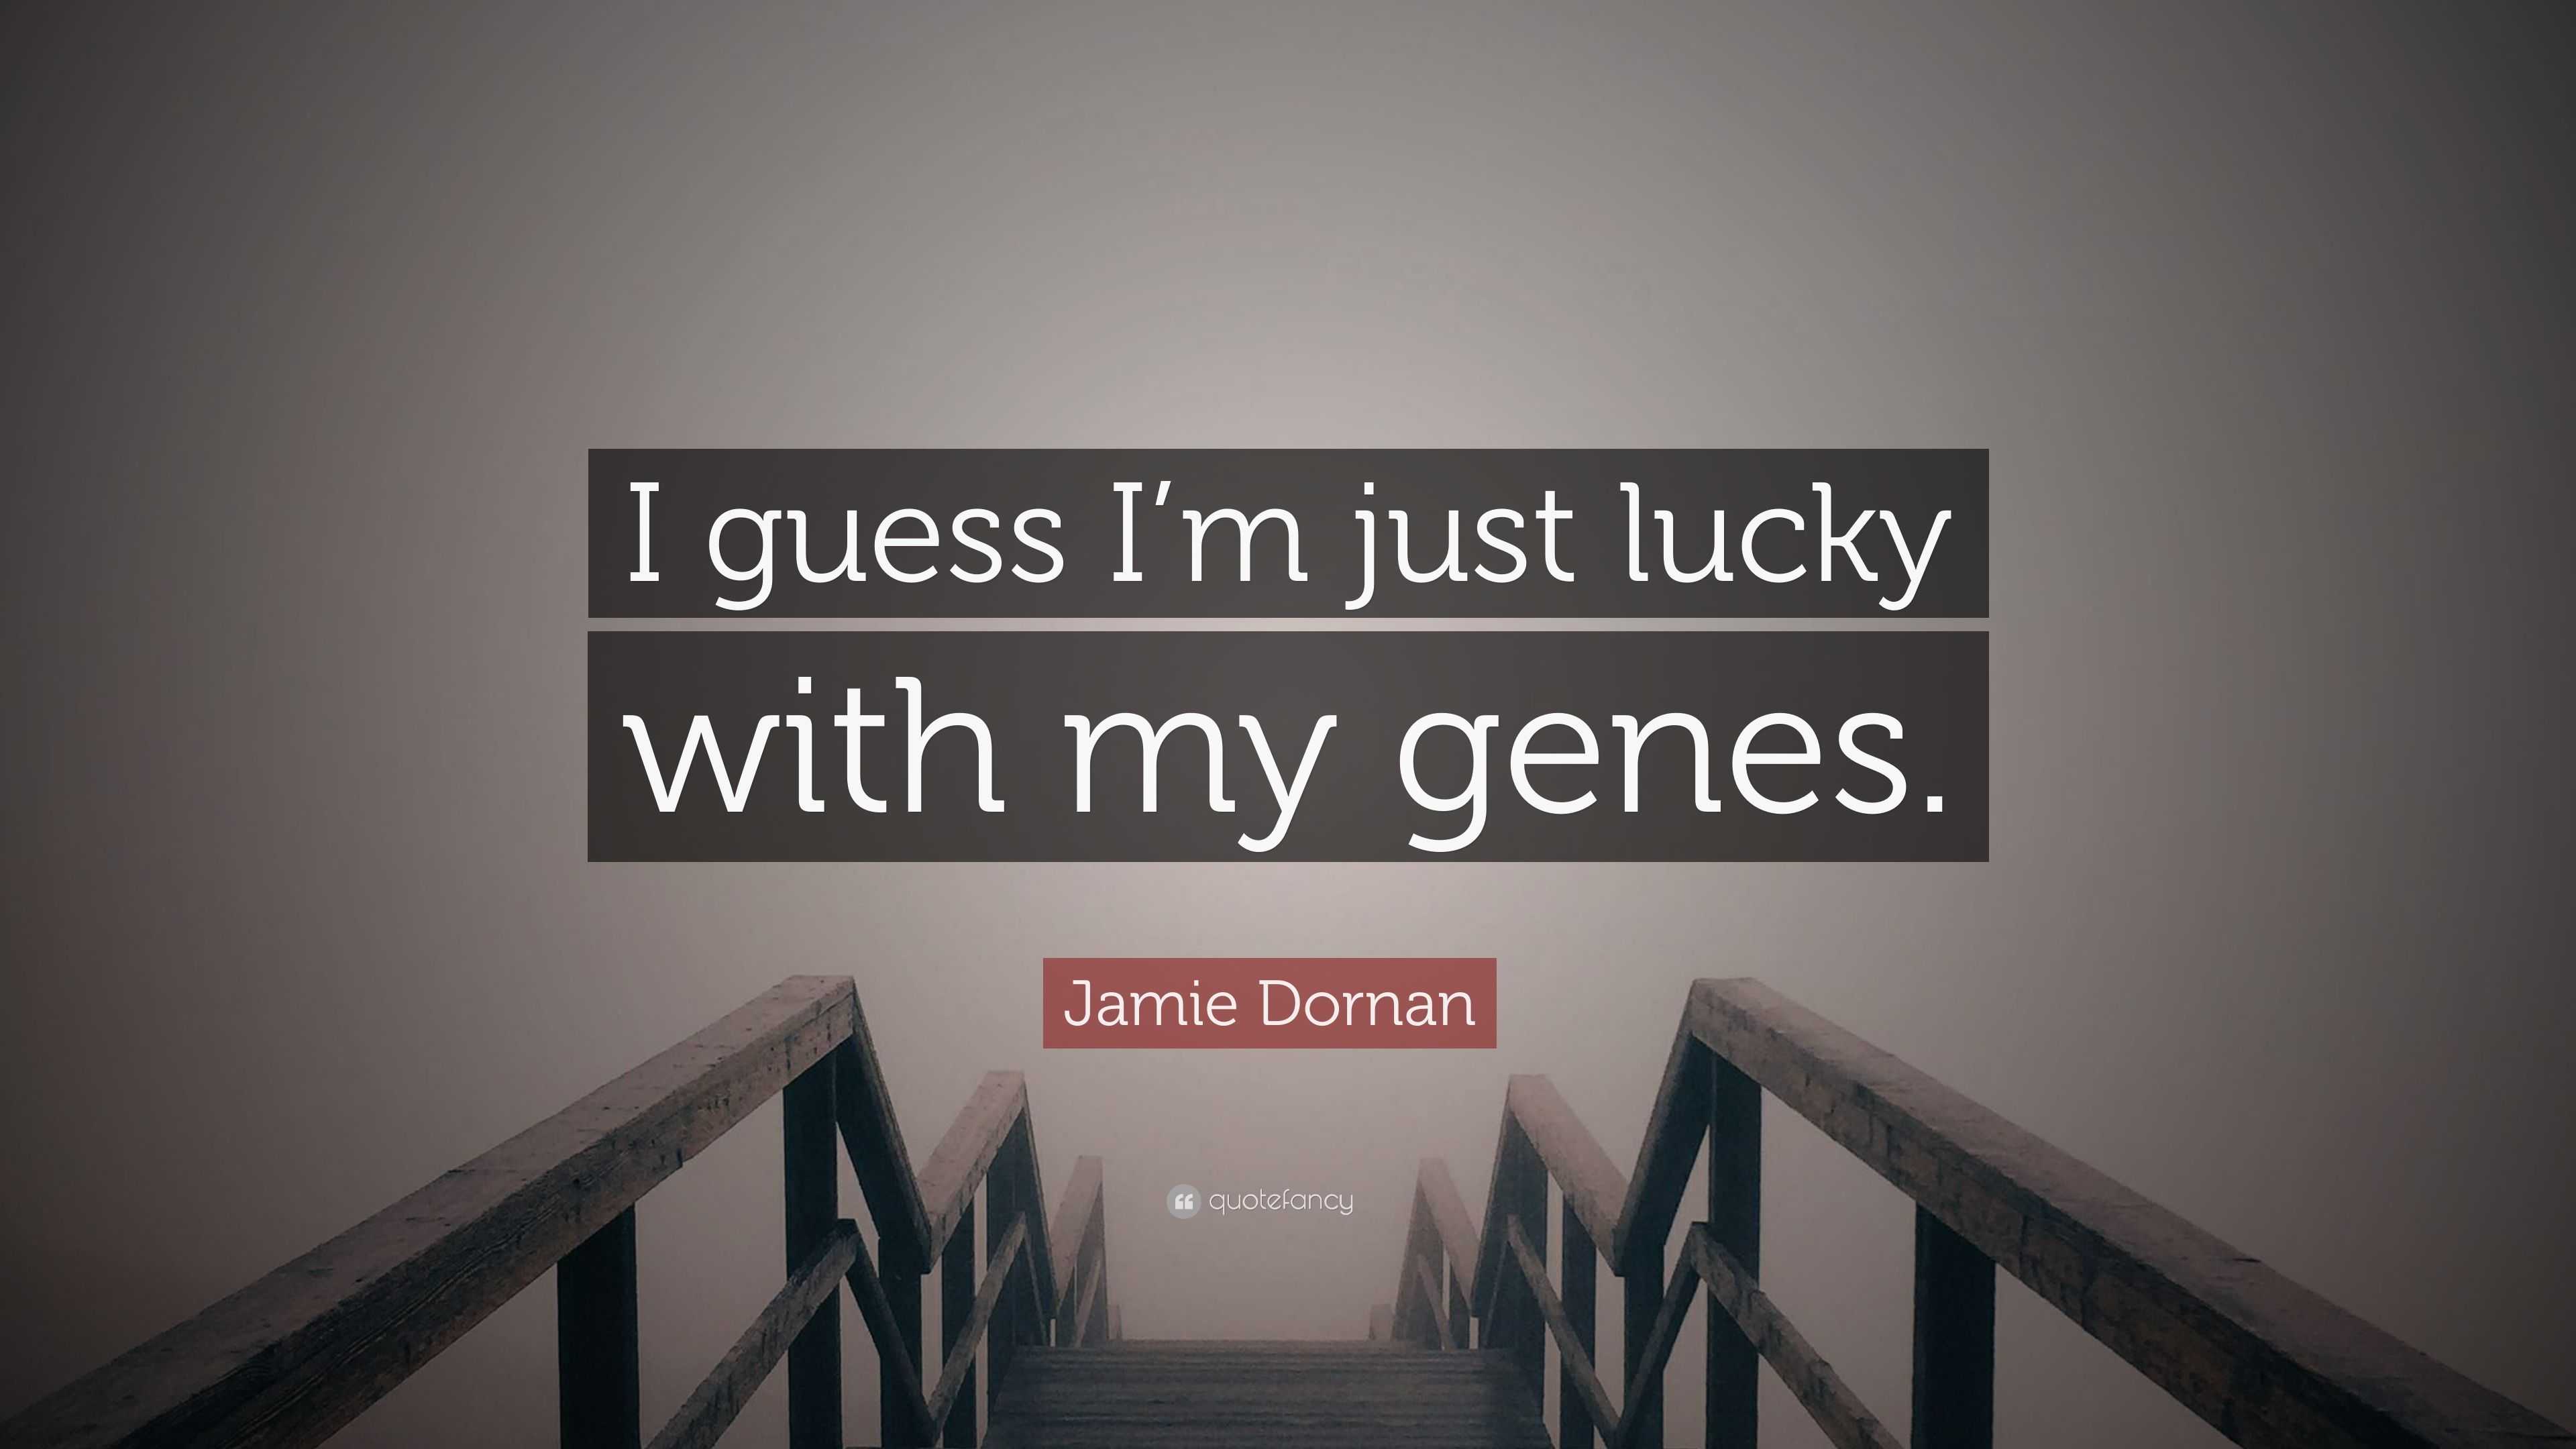 Jamie Dornan Quote: “I Guess I'm Just Lucky With My Genes.”